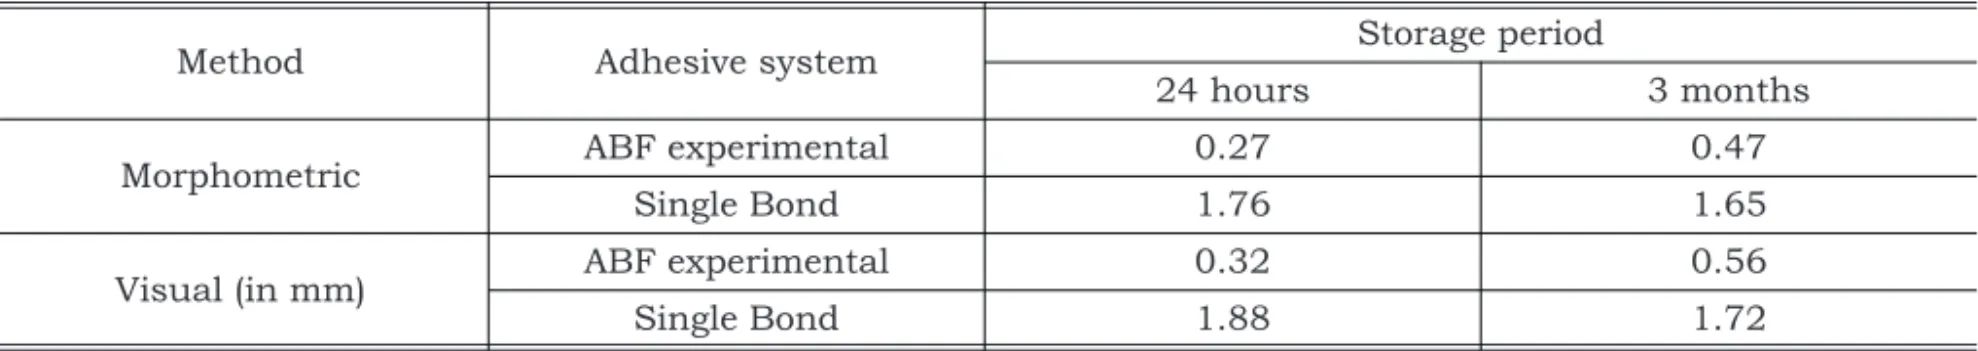 TABLE 2 - Mean values of microleakage (in mm) corresponding to the method versus adhesive system versus storage period interaction.